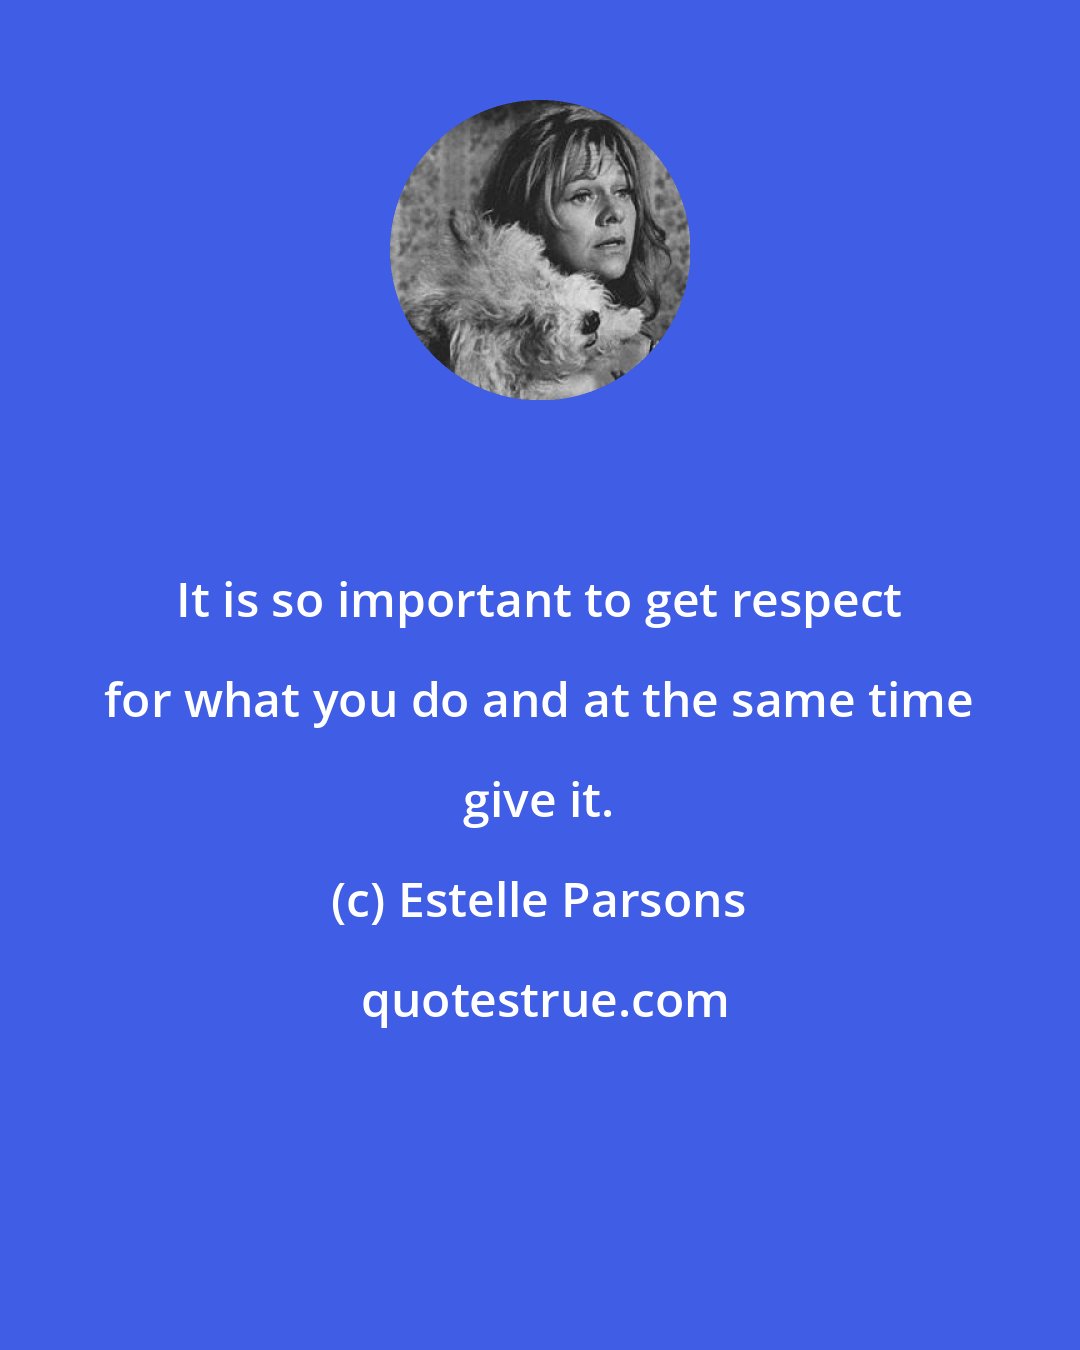 Estelle Parsons: It is so important to get respect for what you do and at the same time give it.